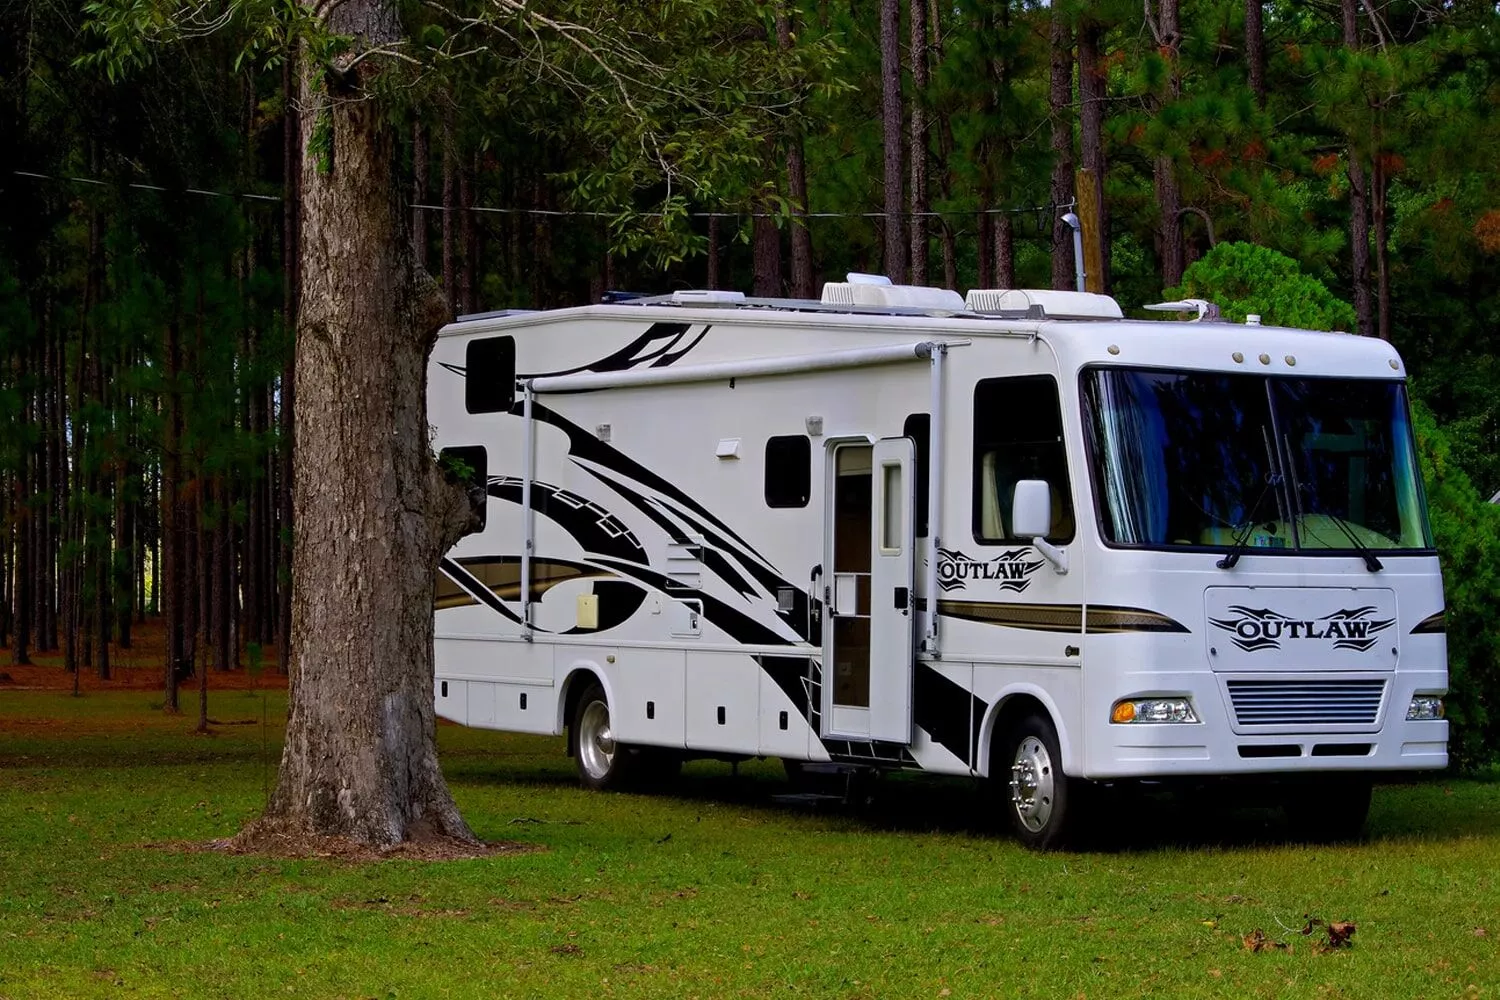 What kind of insurance Covers an RV?